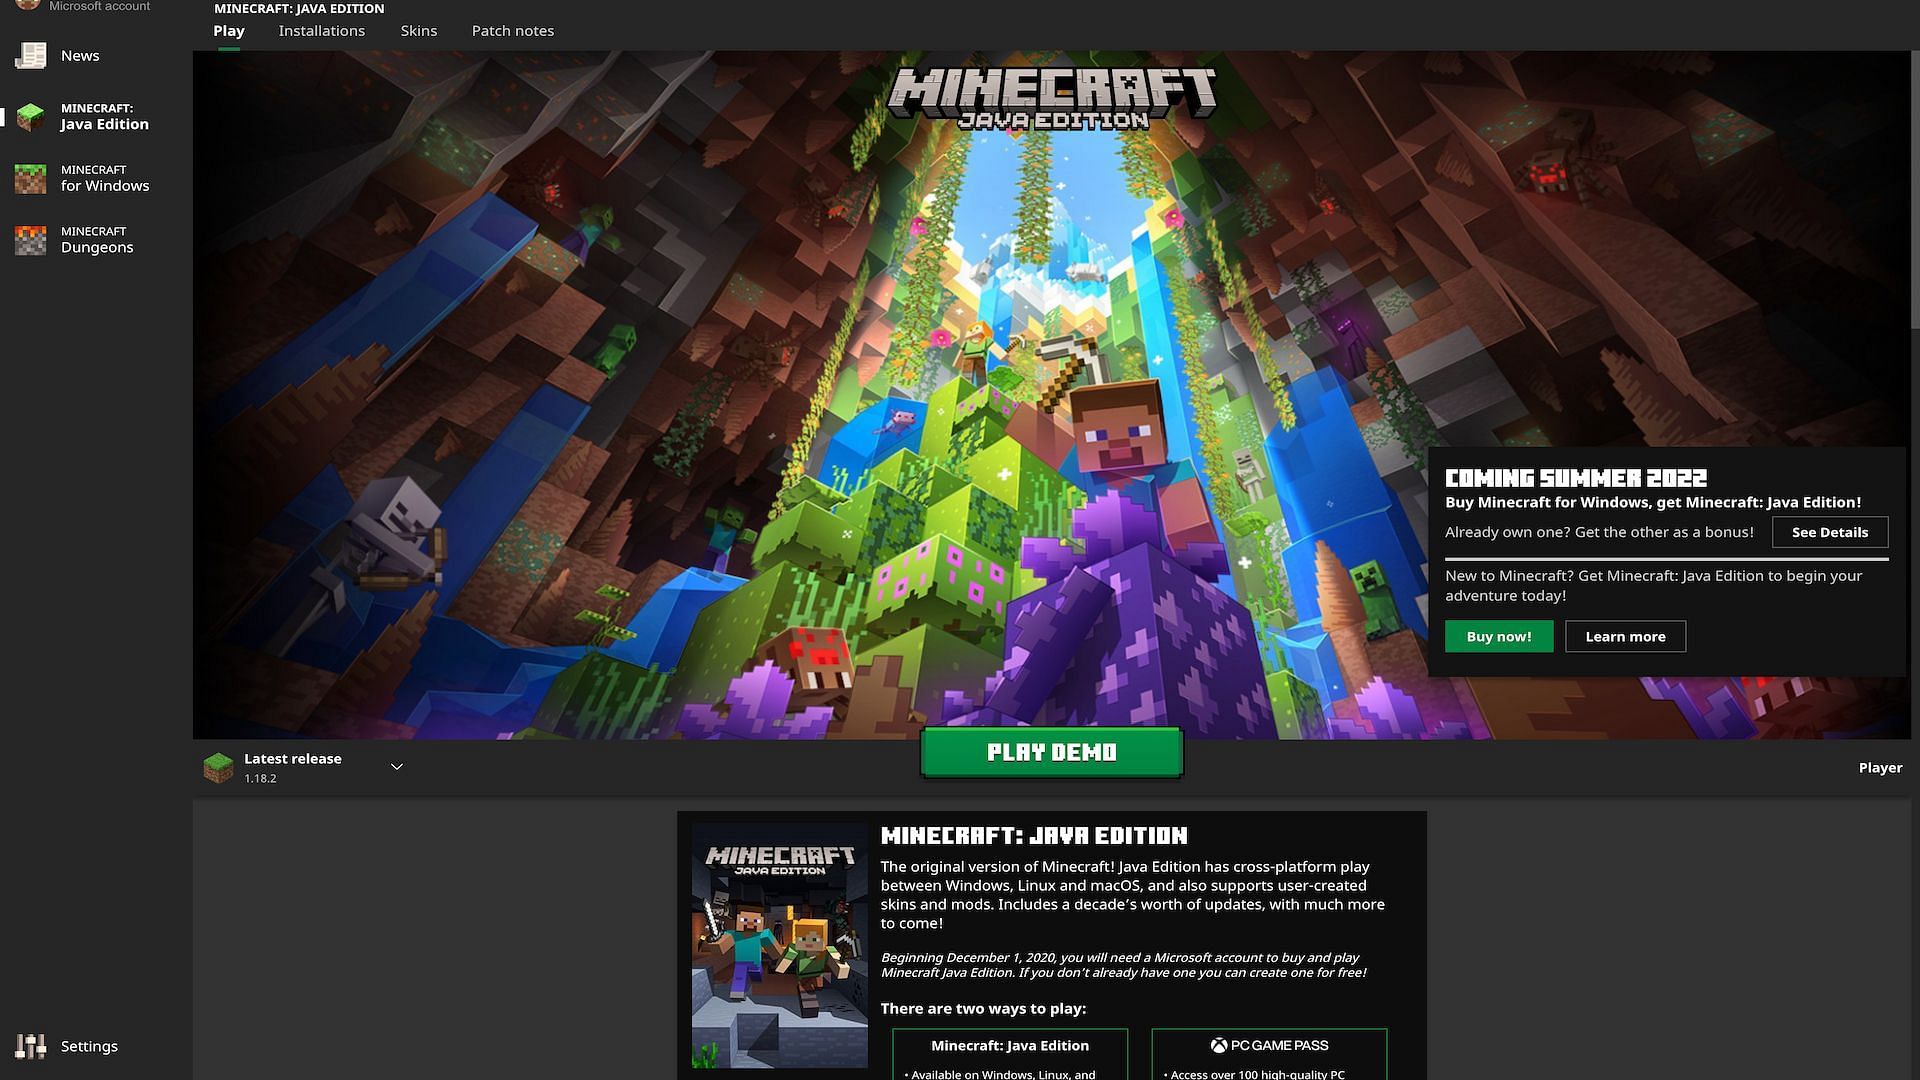 Players are able to download the launcher for free and play a demo version for up to 100 minutes (Image via Mojang)